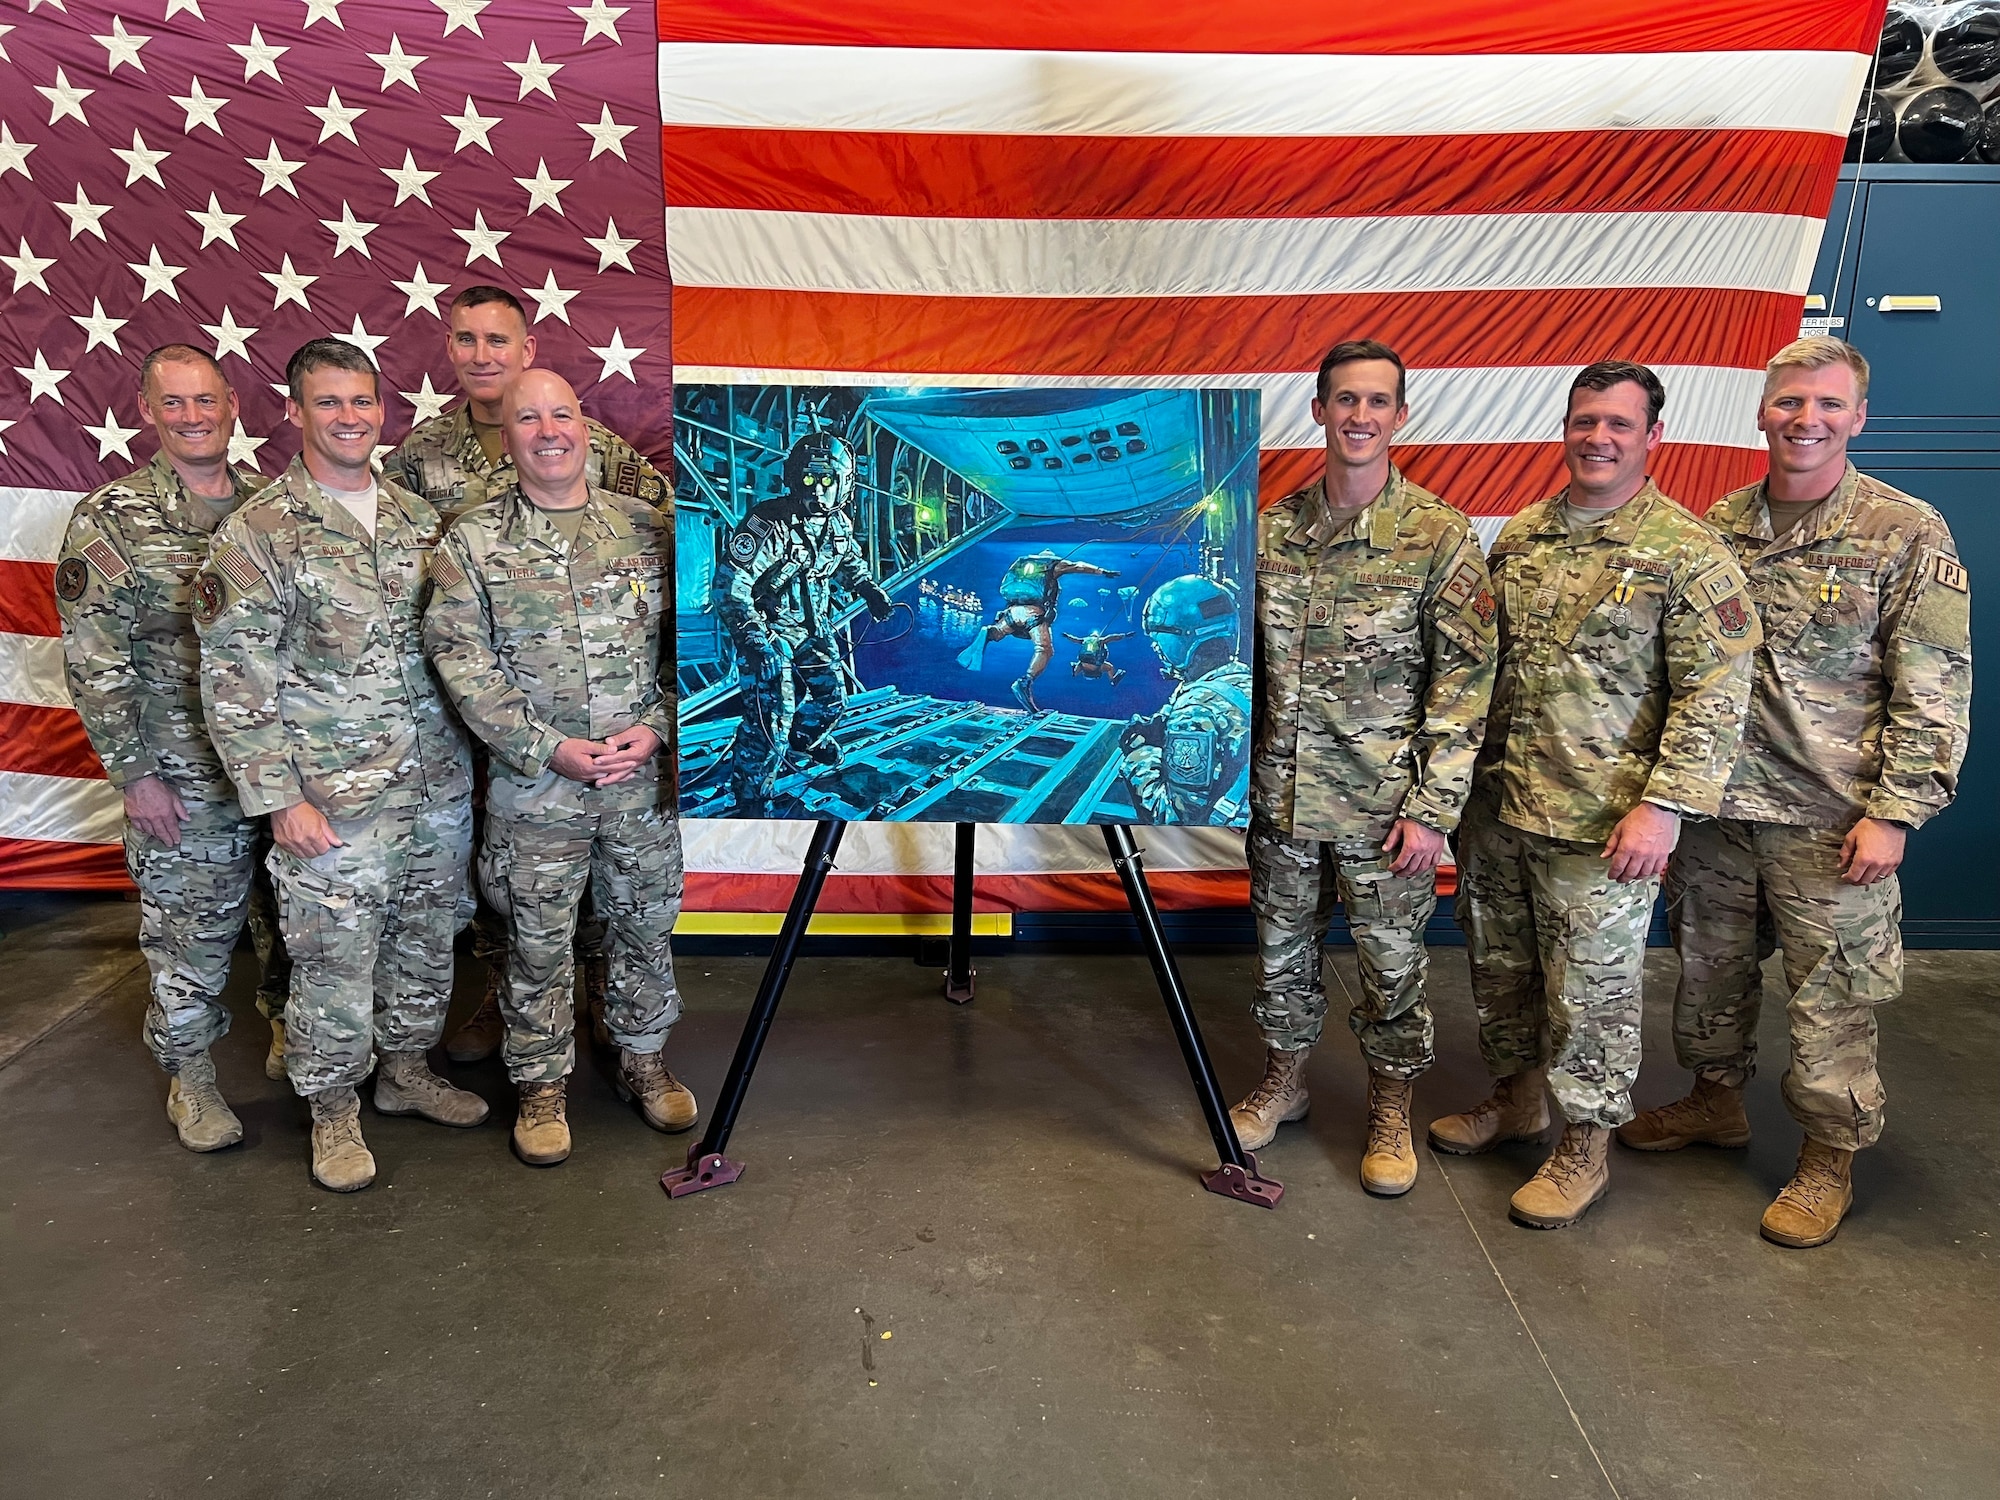 New York Air National Guard Airmen who were part of a 2017 mission to save two badly burned crewmen on board the Slovenian bulk carrier Tamar pose with a painting commemorating the mission during an awards ceremony June 4, 2022, at F.S. Gabreski Air National Guard Base in Westhampton Beach, New York.